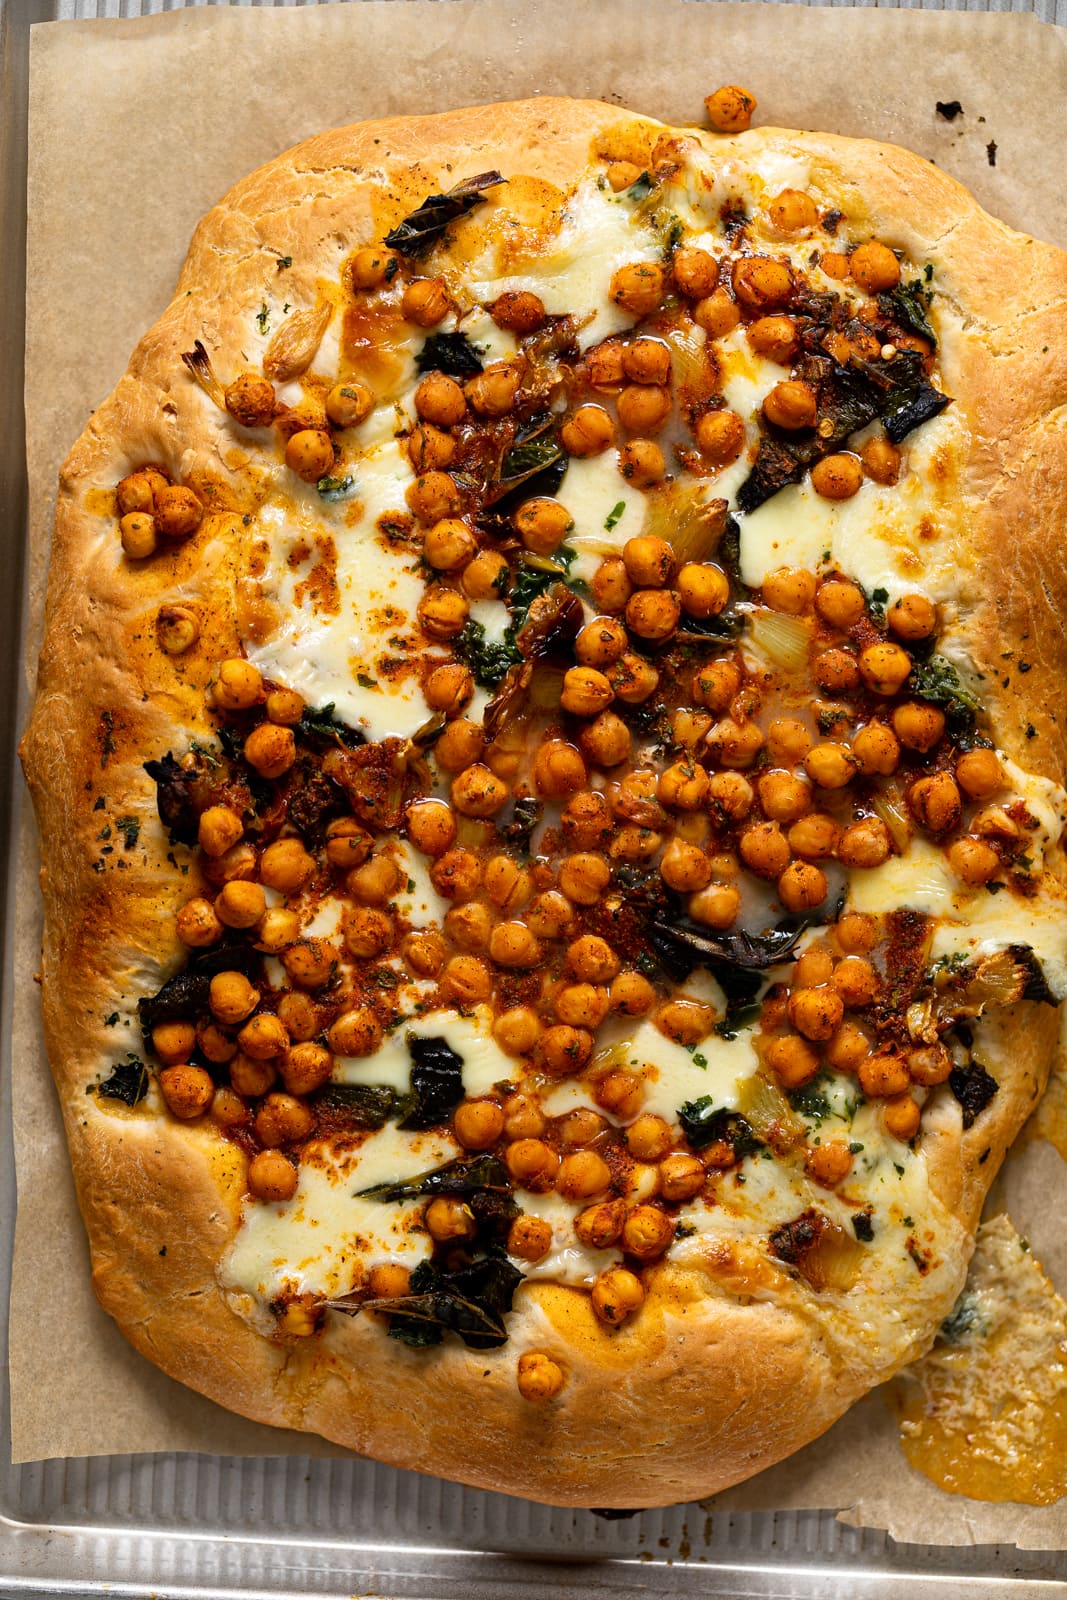 Cooked Sheet Pan Roasted Garlic Buffalo Chickpea Pizza on parchment paper